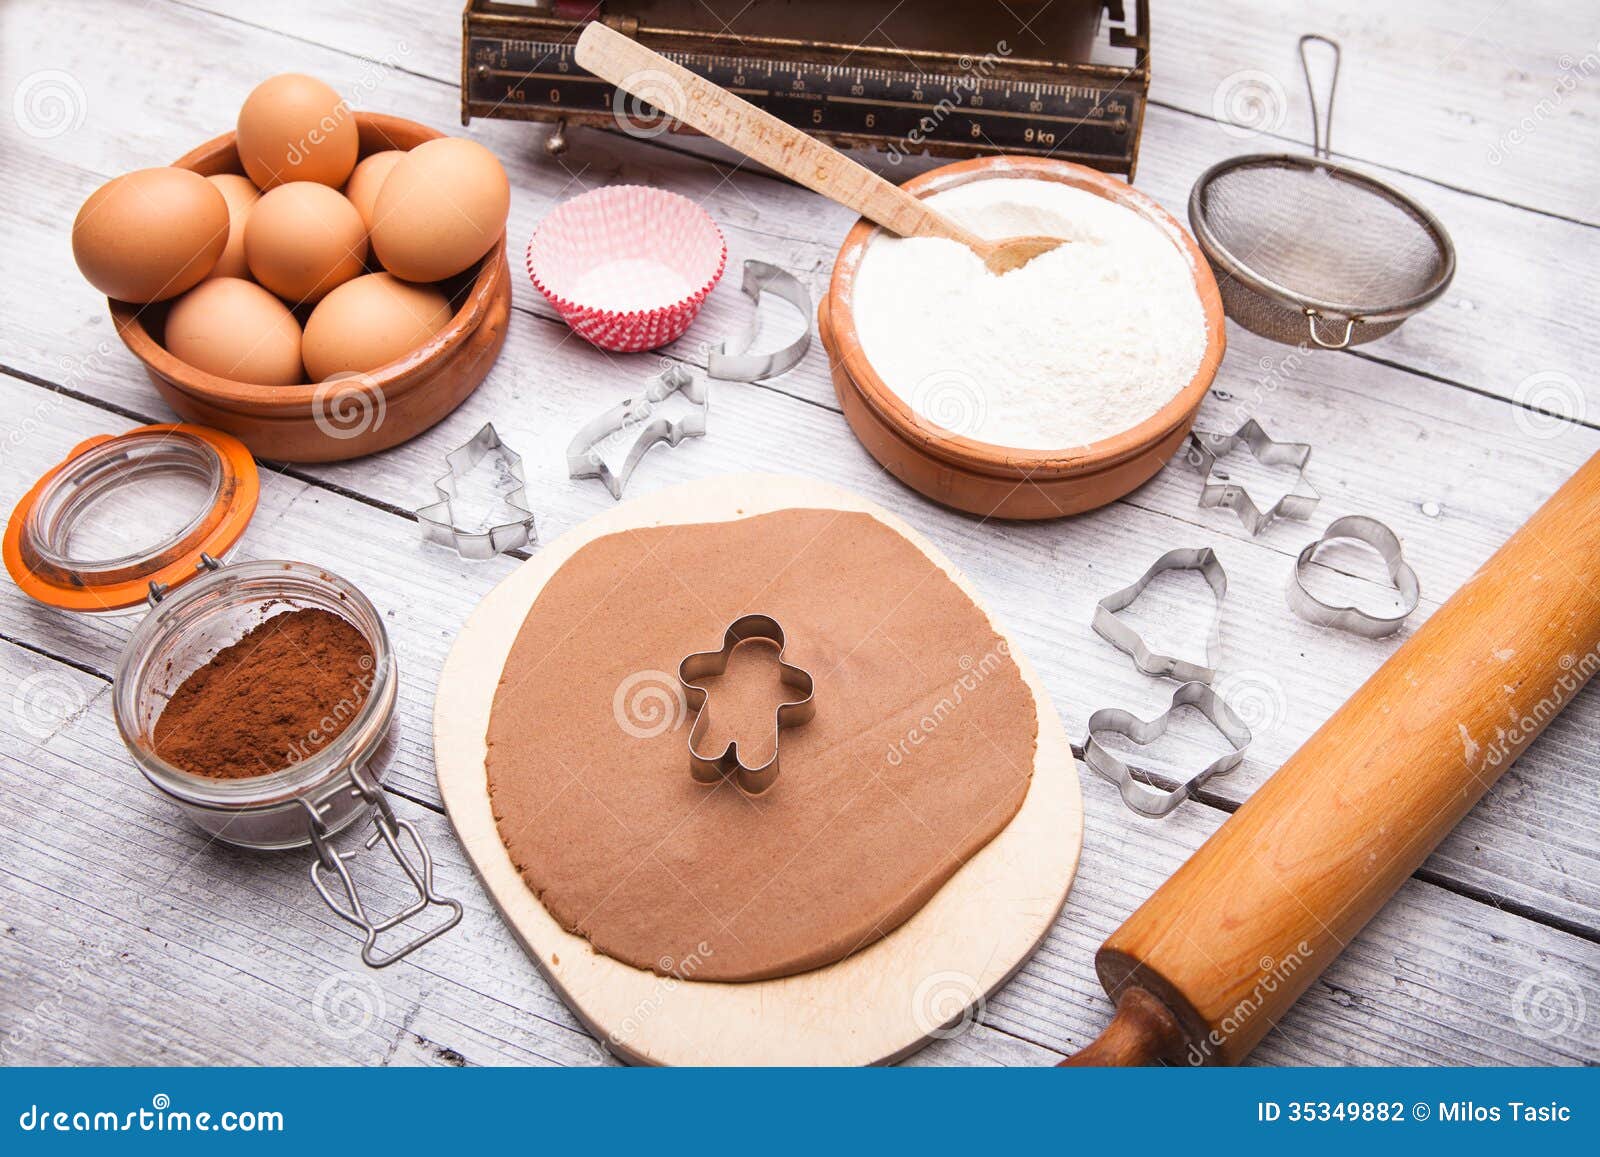 Ingredient For Cooking Stock Photography - Image: 35349882